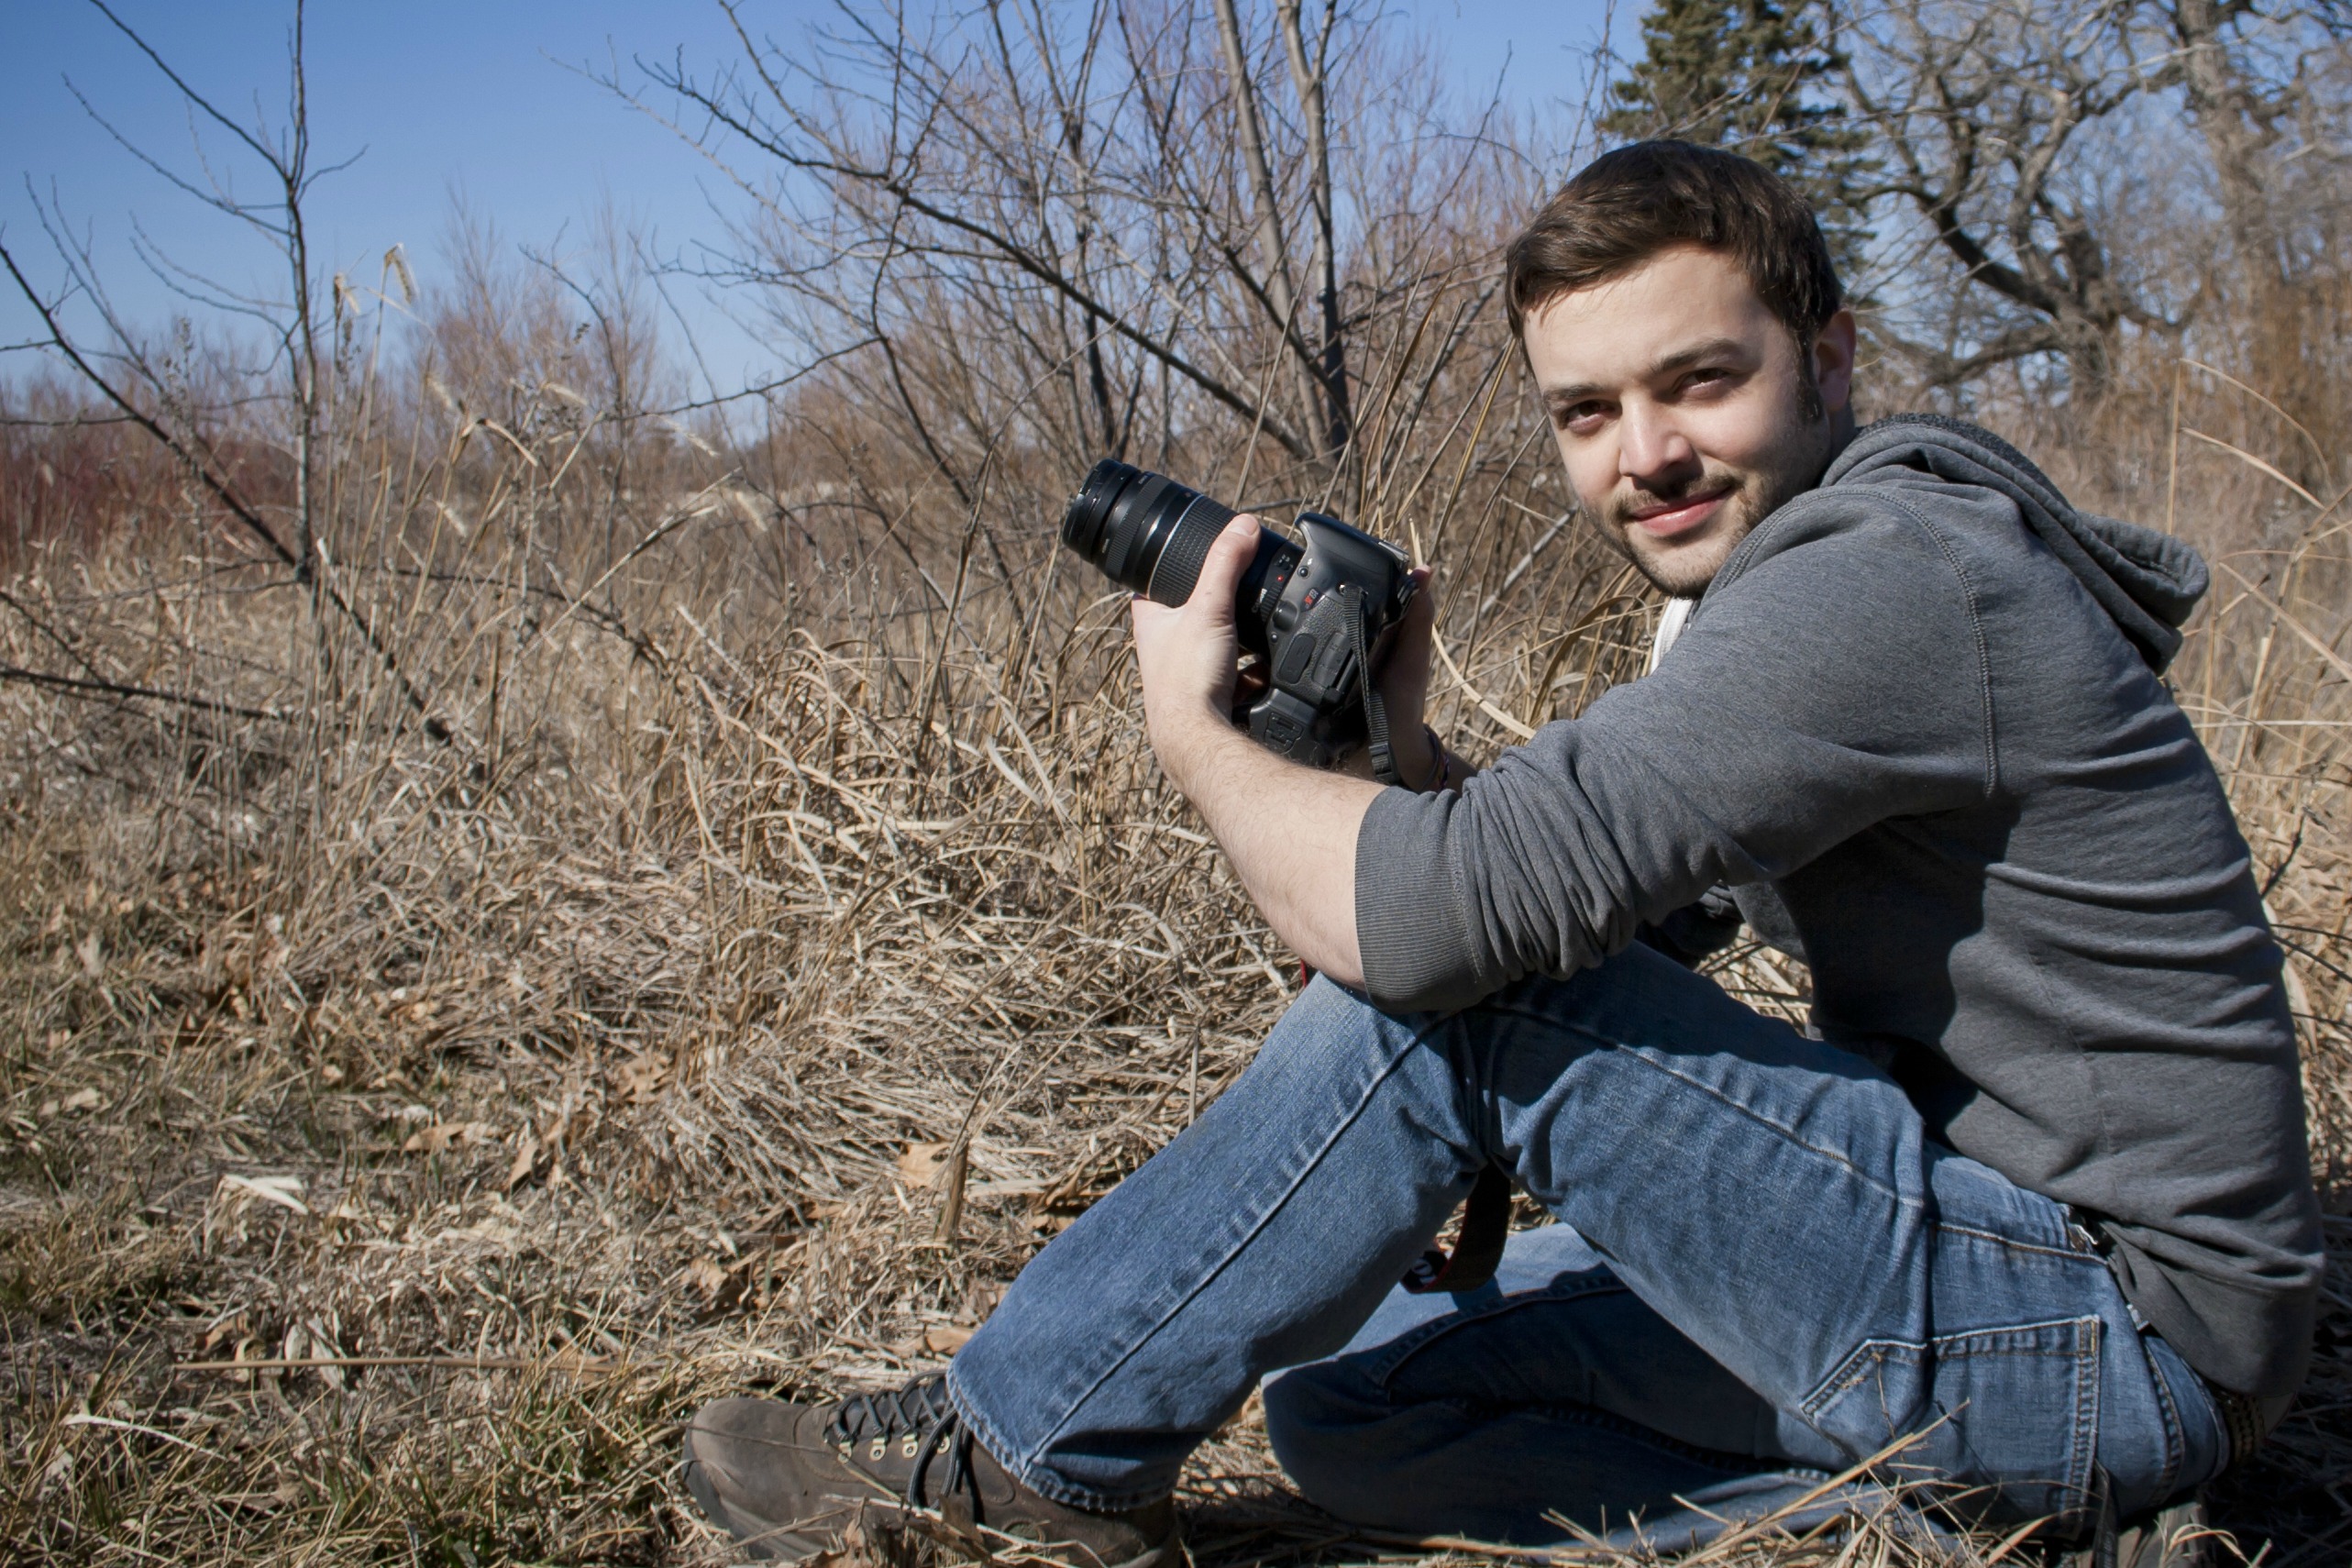 SNR's Nick Manes integrates his love for photography with his natural resources studies.